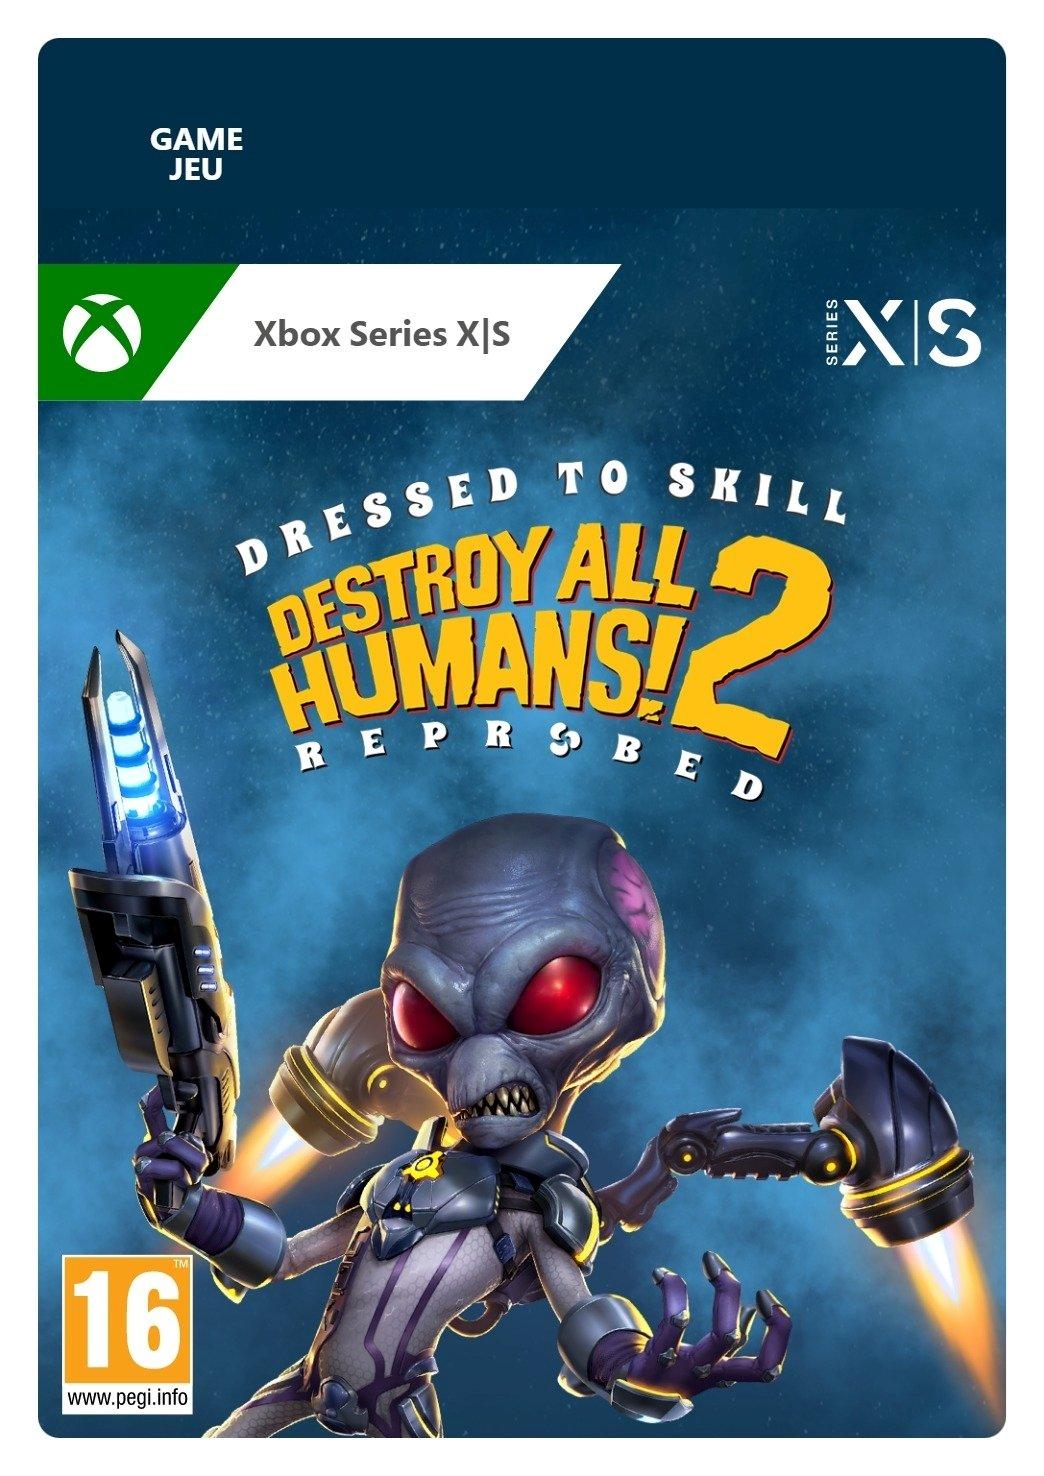 Destroy All Humans! 2 Reprobed: Dressed to Skill Edition - Xbox Series X - Game | G3Q-01411 (926e7dc6-3755-6e47-a4d8-930e512a35ac)